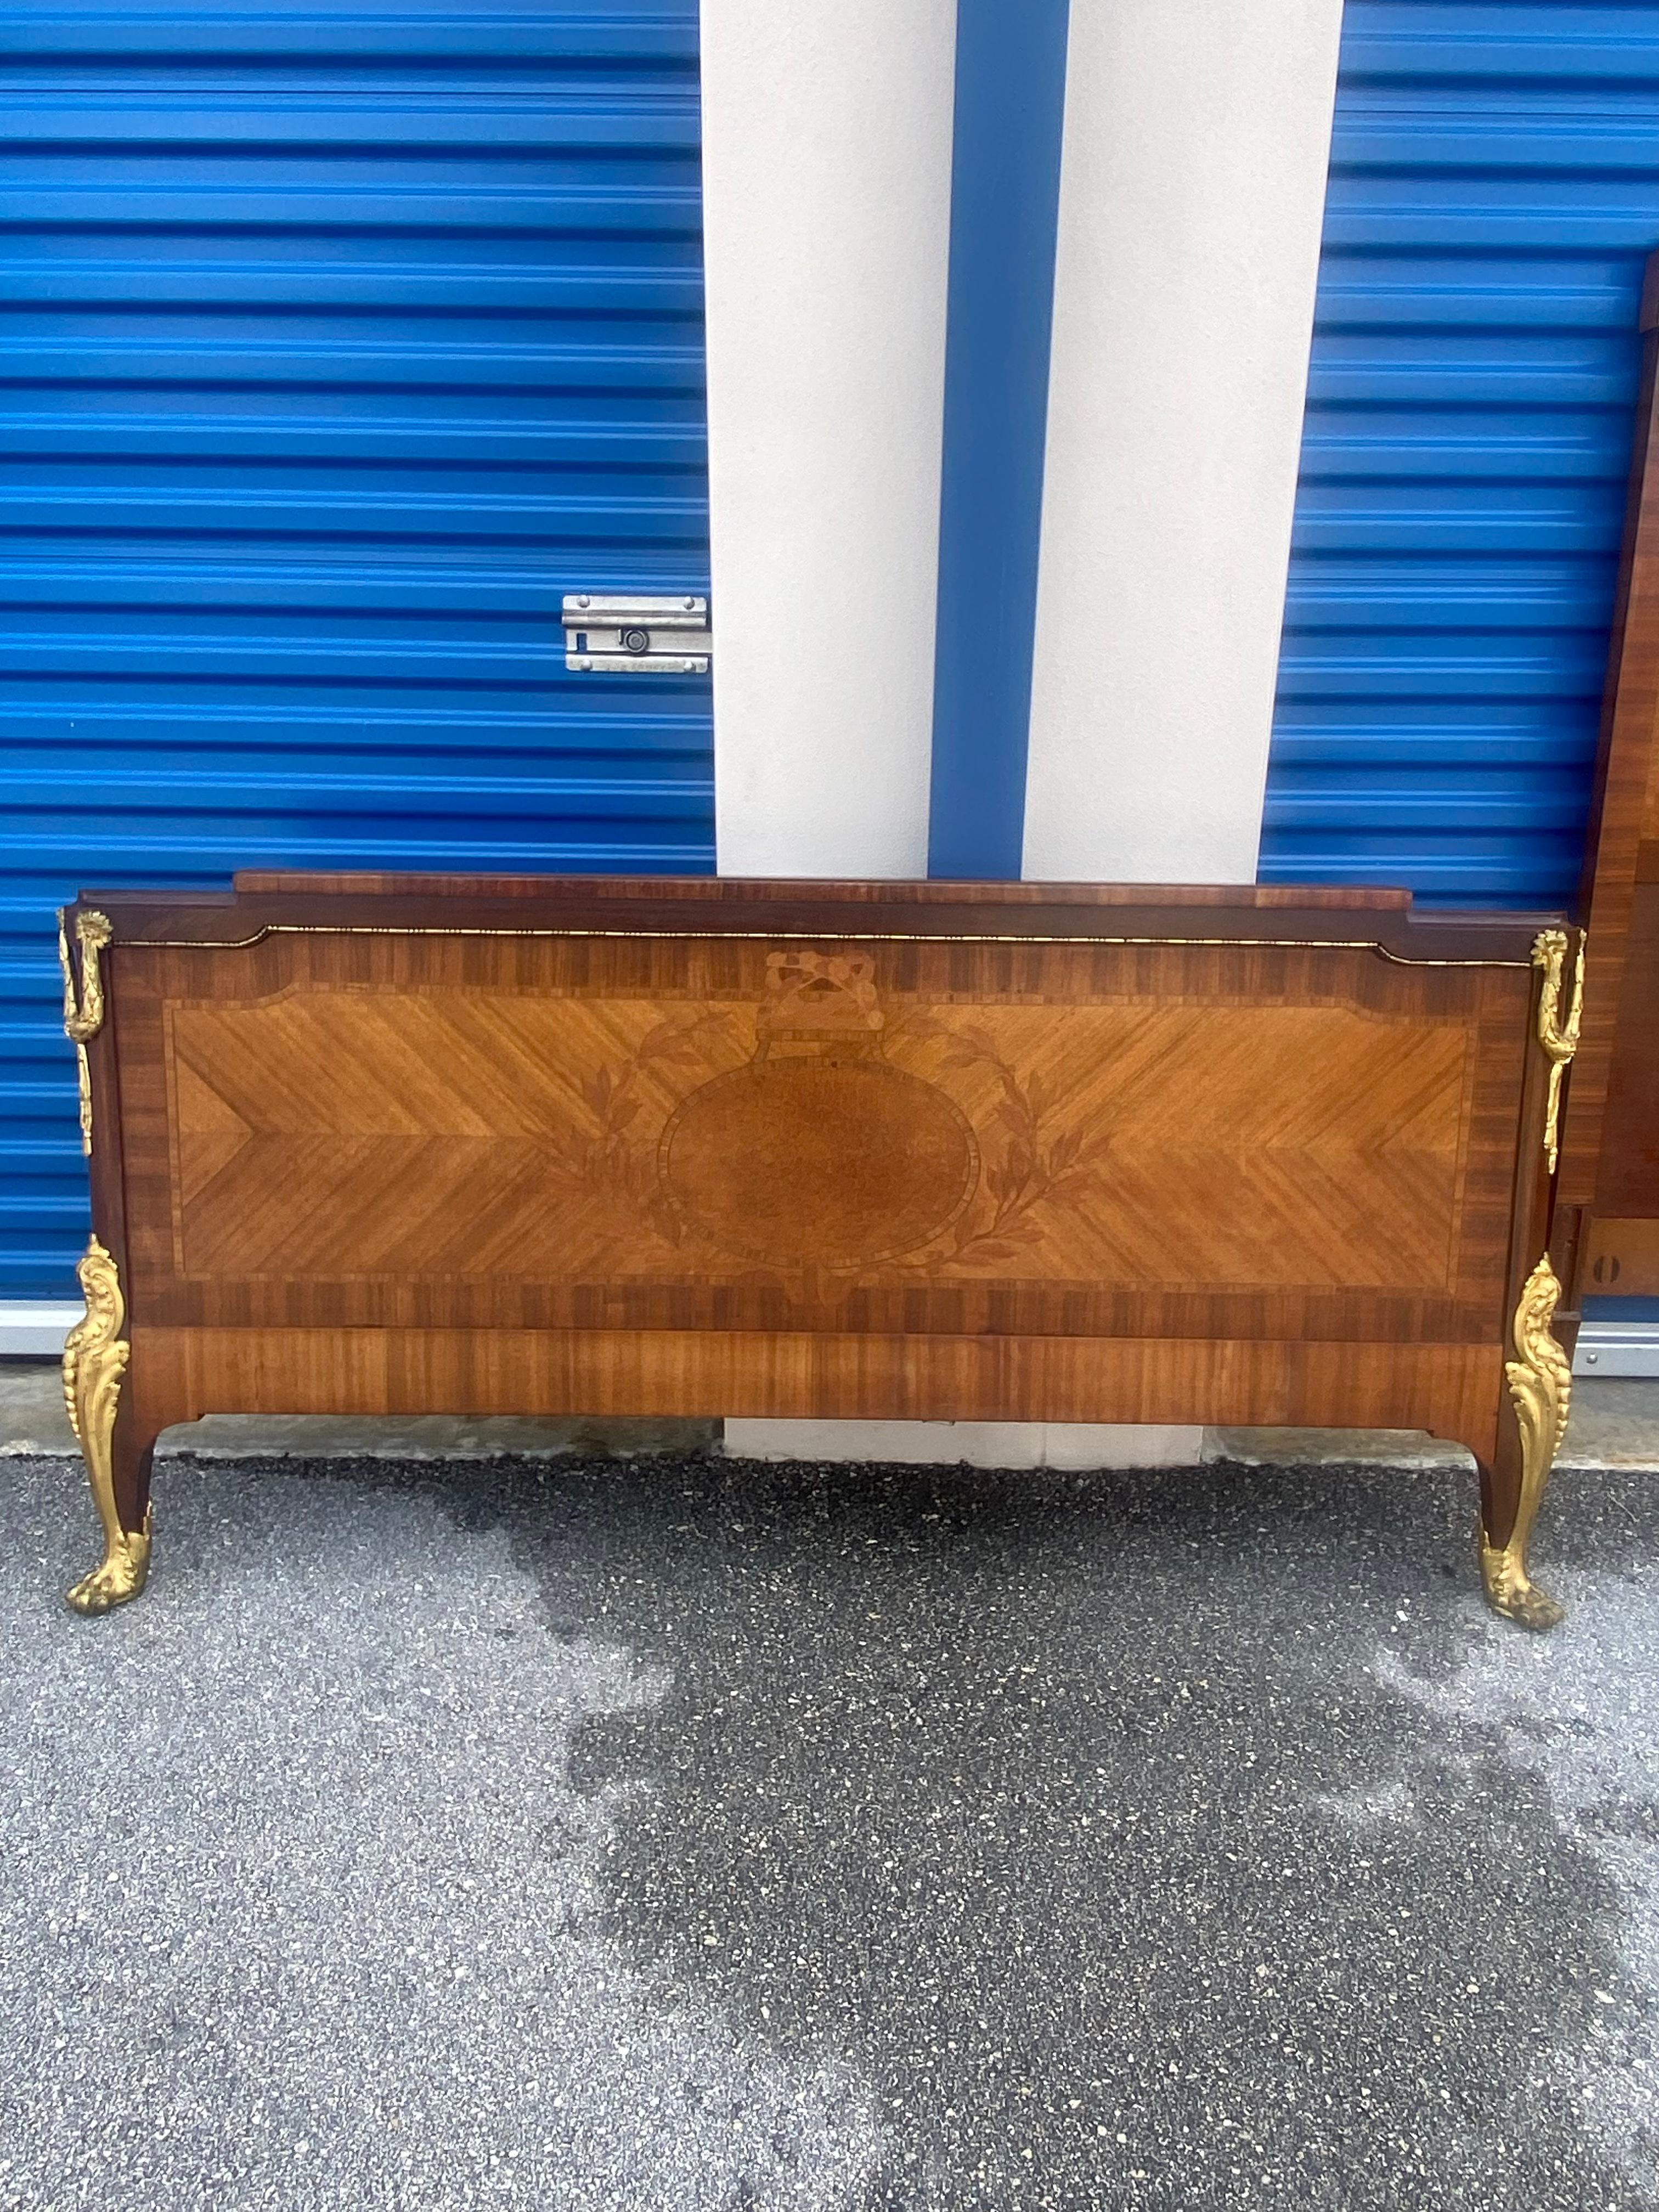 Rare Neoclassical Empire Louis Style Ormolu Bronze Inlaid Wood Queen Bed Frame For Sale 4